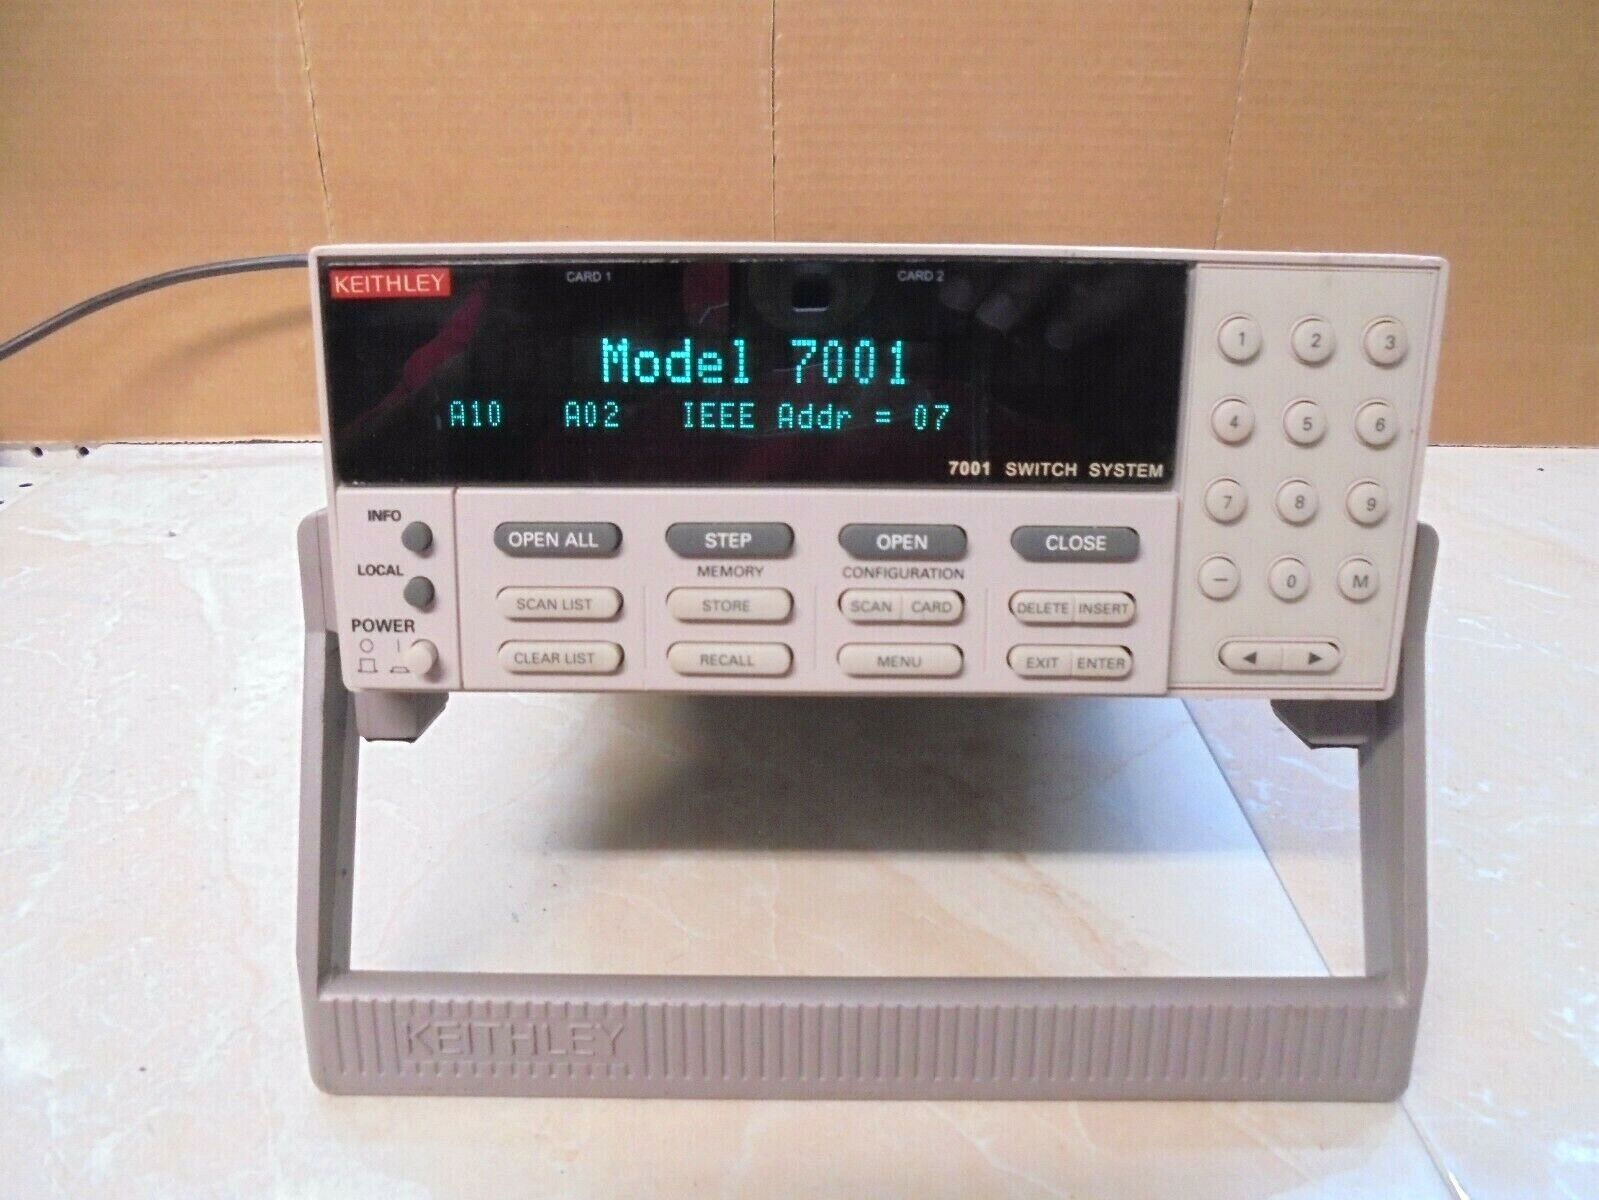 Keithley 7001 Switch mainframe. Tested for power-up No Cards